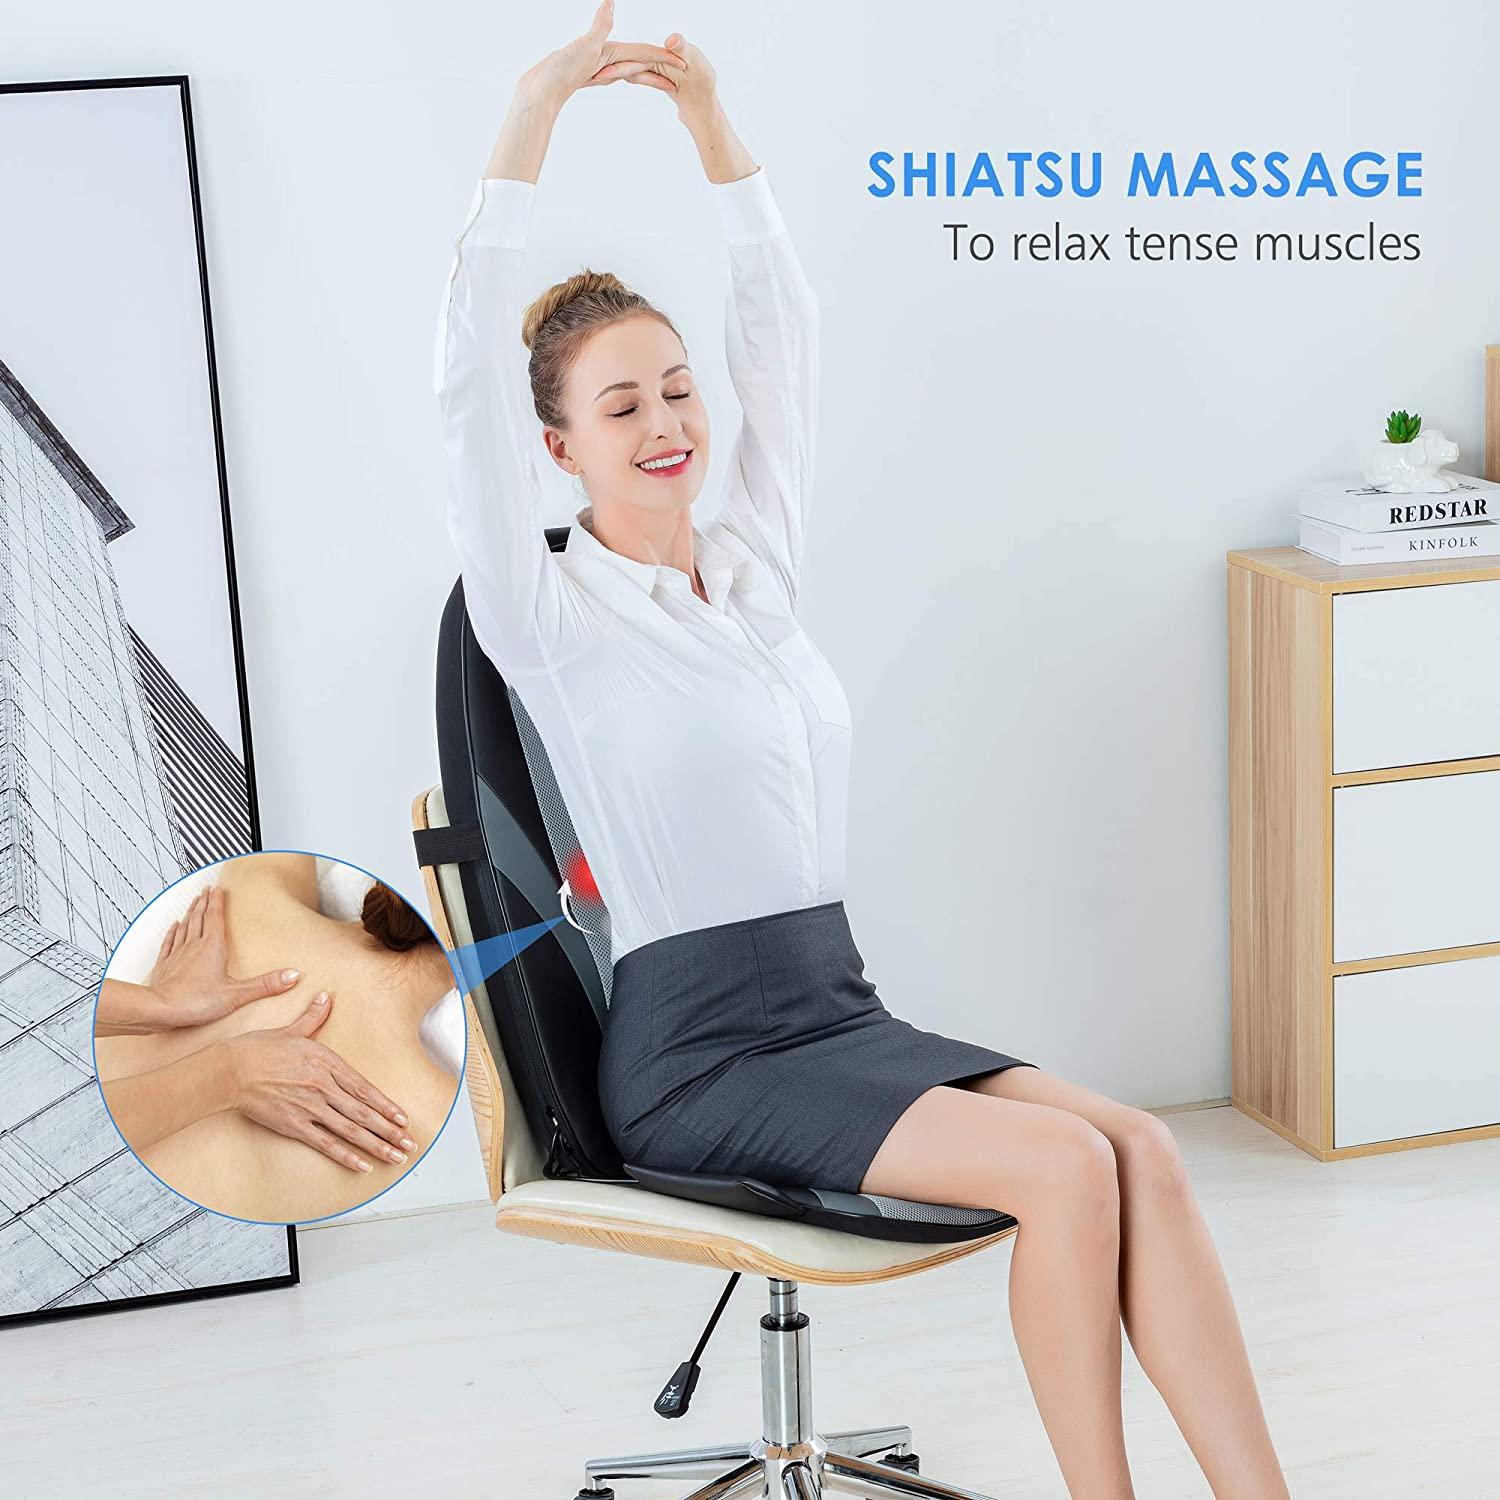  Snailax Back Massager with Soothing Heat, Gifts for Men, Women,  Electric Deep Tissue Kneading Massage Chair Pad for Full Back, Body, Pain  Relief, Home, Office Use : Health & Household